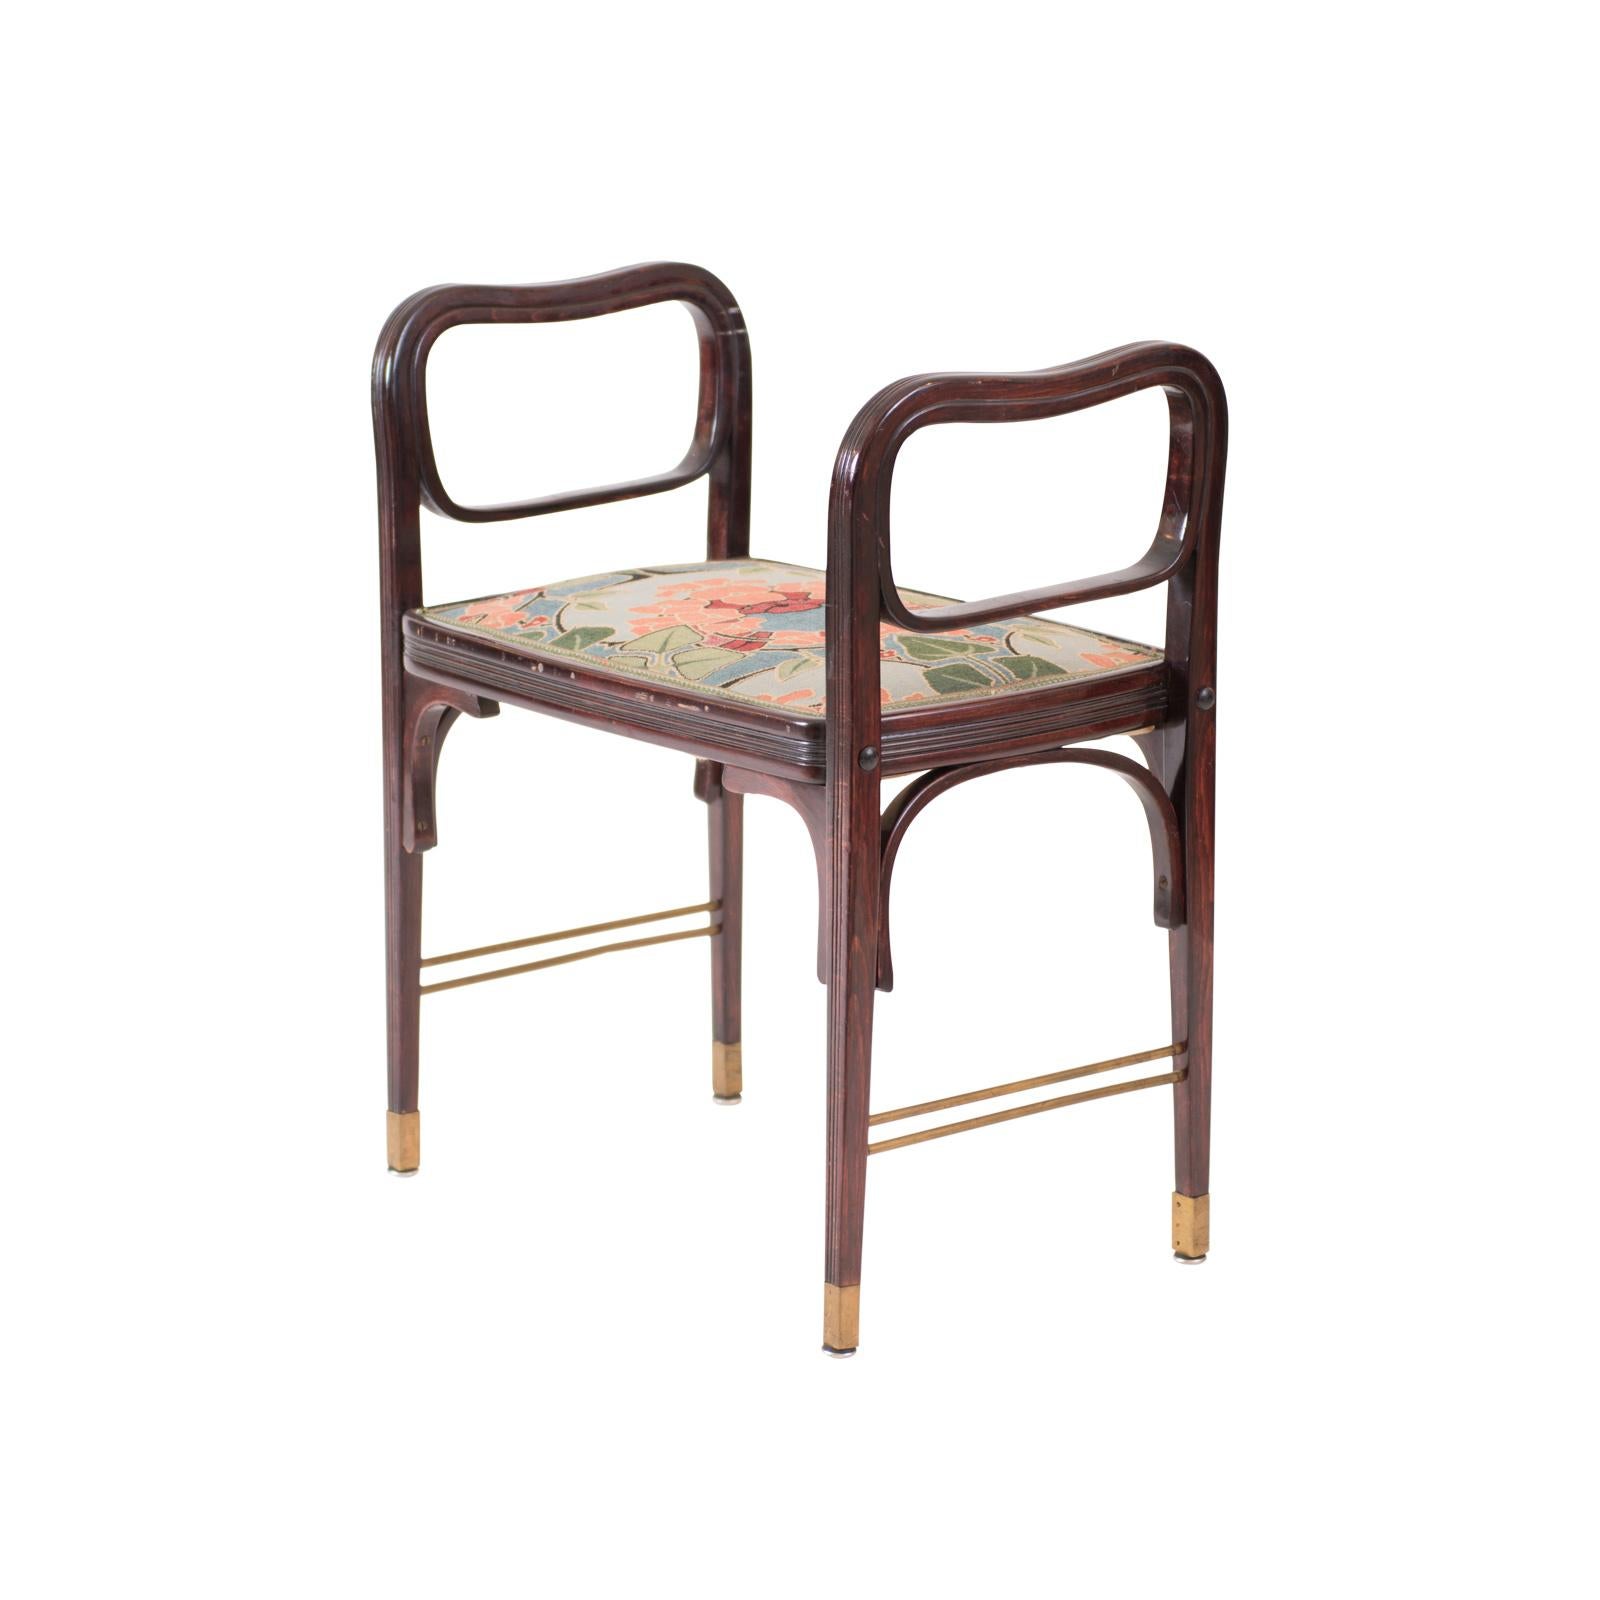 As pioneer and master of the Modern, Otto Wagner seized the then rather new technique of bending wood for his furniture designs.
Occasionally These furniture are attributed to Koloman Moser as well.
The design of this Ensemble dated back in 1901.